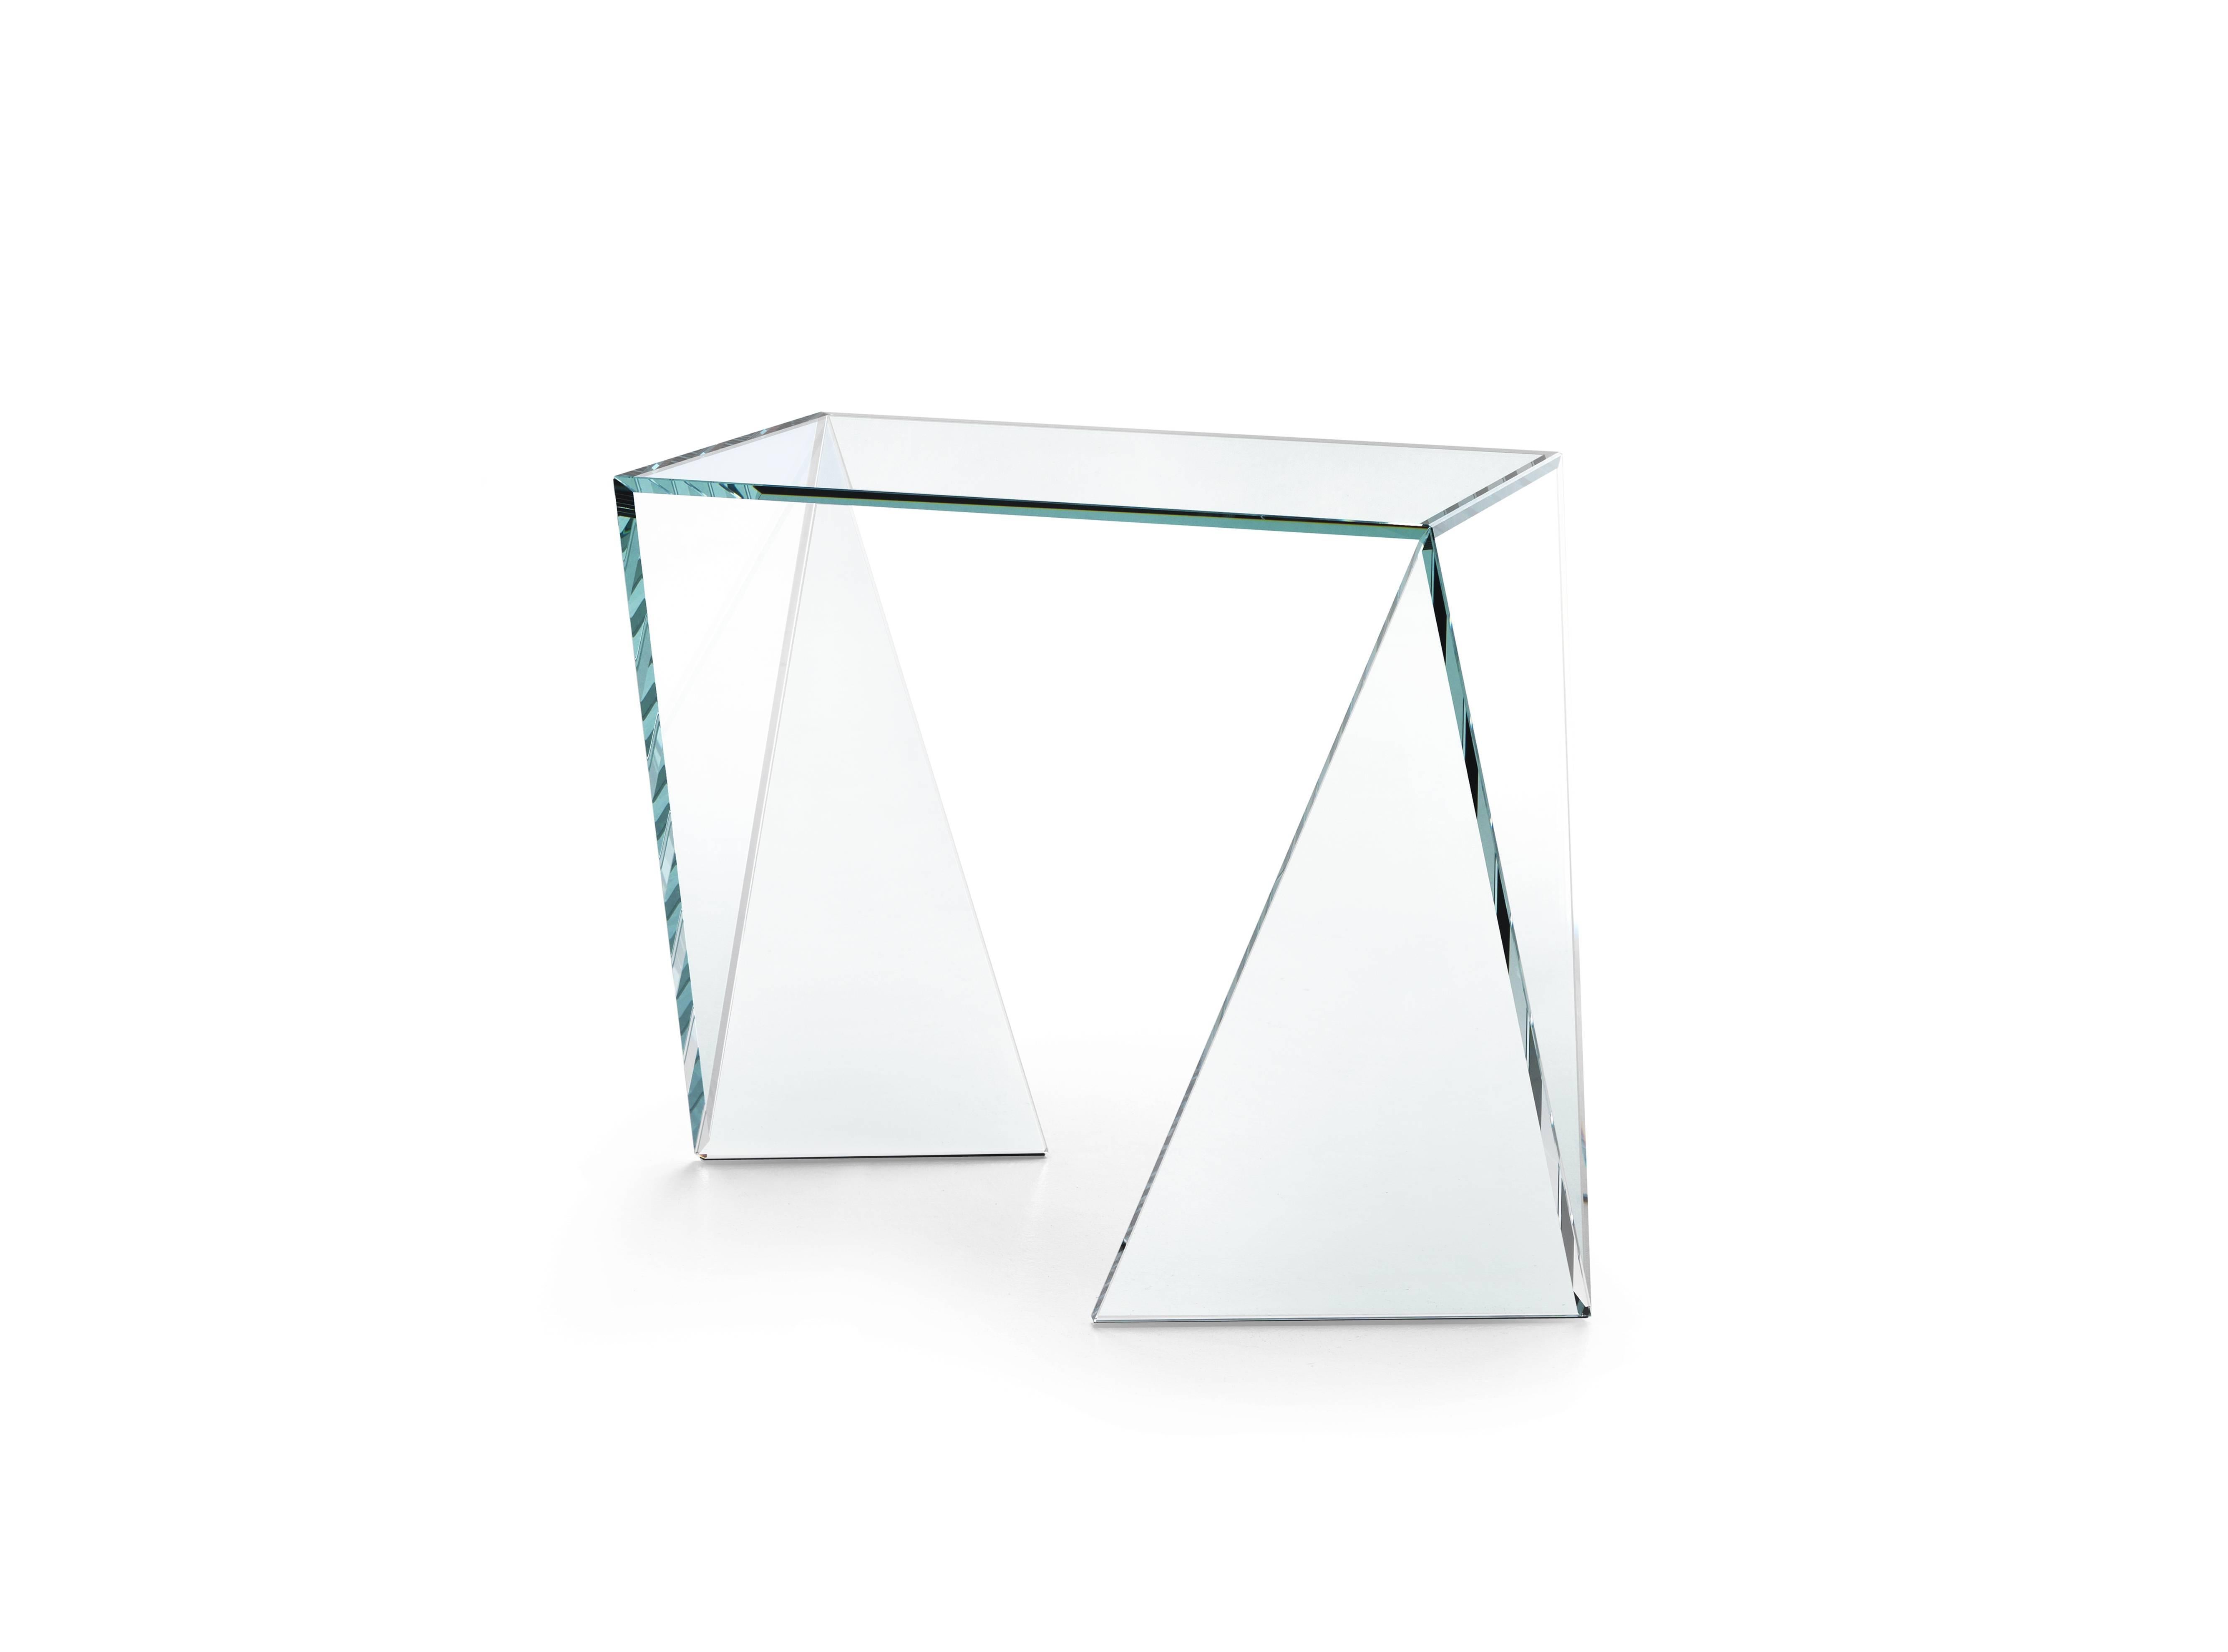 The side table 'Origami Classic' is made of extra-clear crystal glass. Each sheet of extra-clear crystal glass is cut and ground with extreme precision, then the sheets are assembled by hand, having to fit together perfectly, the gluing operation